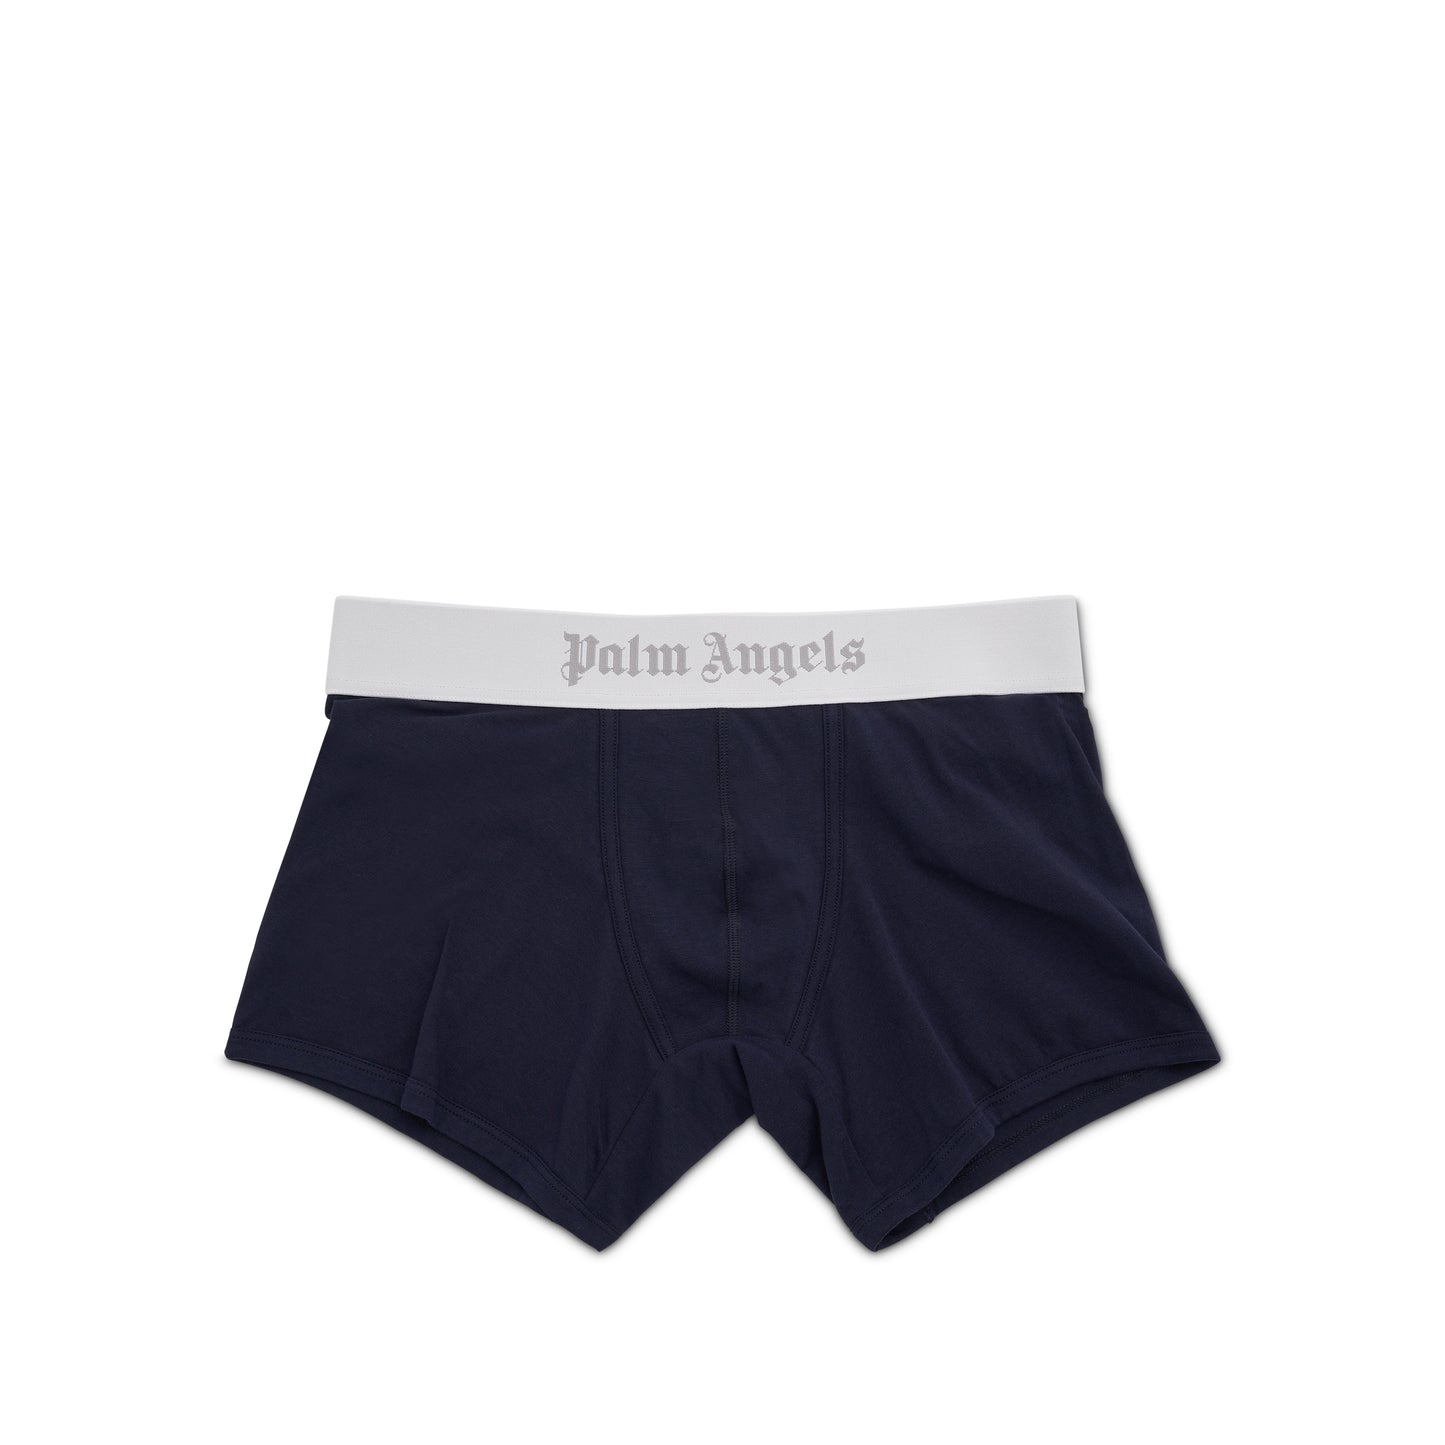 PA Boxer Bipack in Navy Blue/White